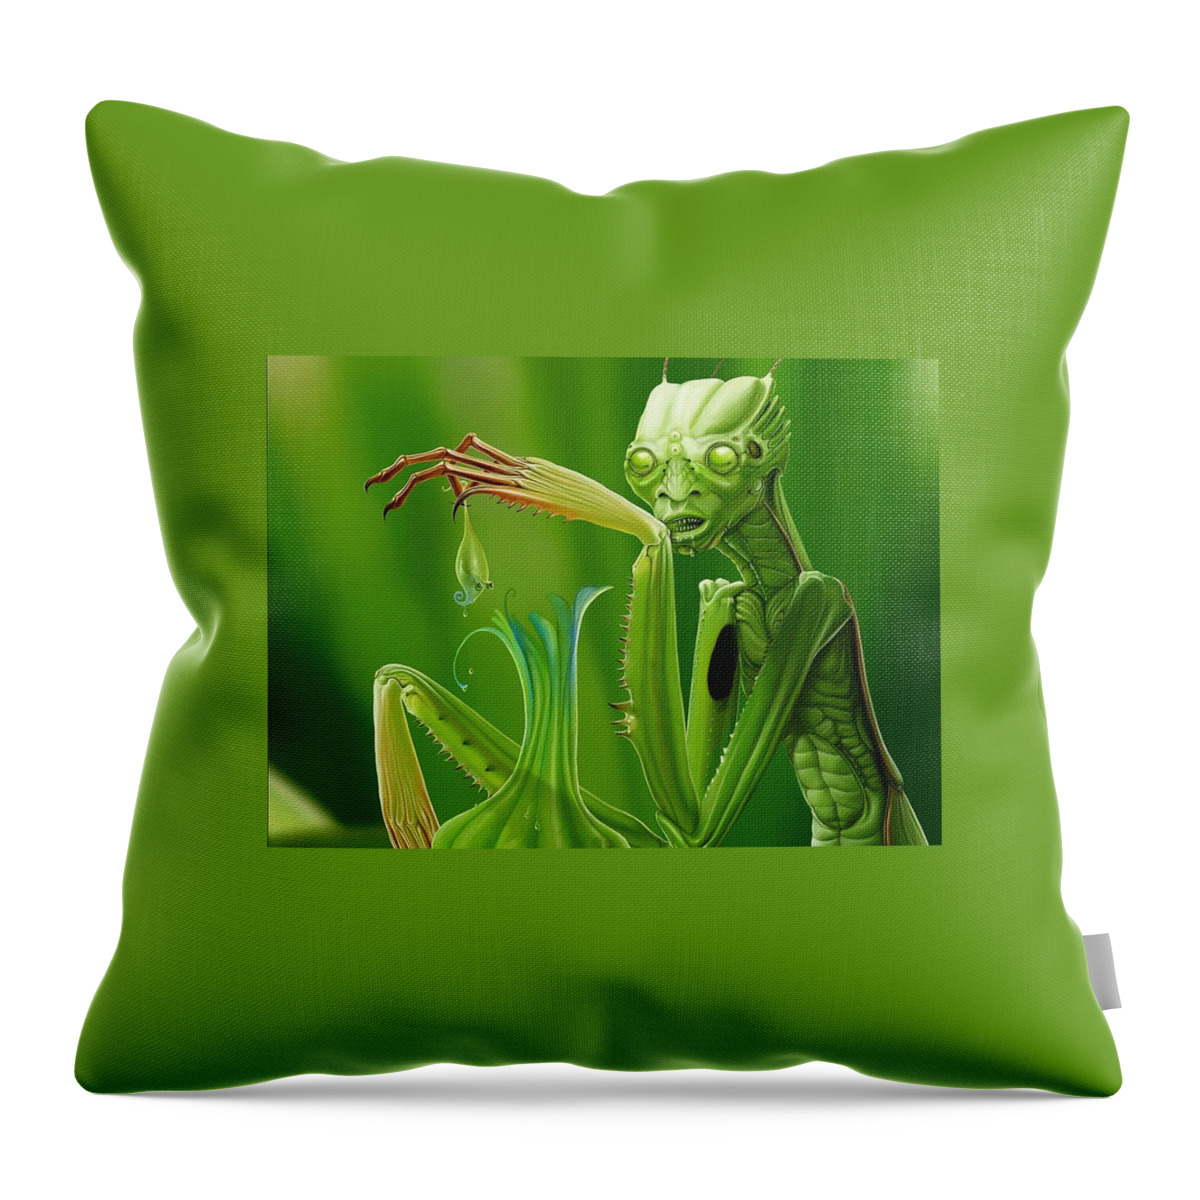 Insect Throw Pillow featuring the digital art Insect #7 by Super Lovely